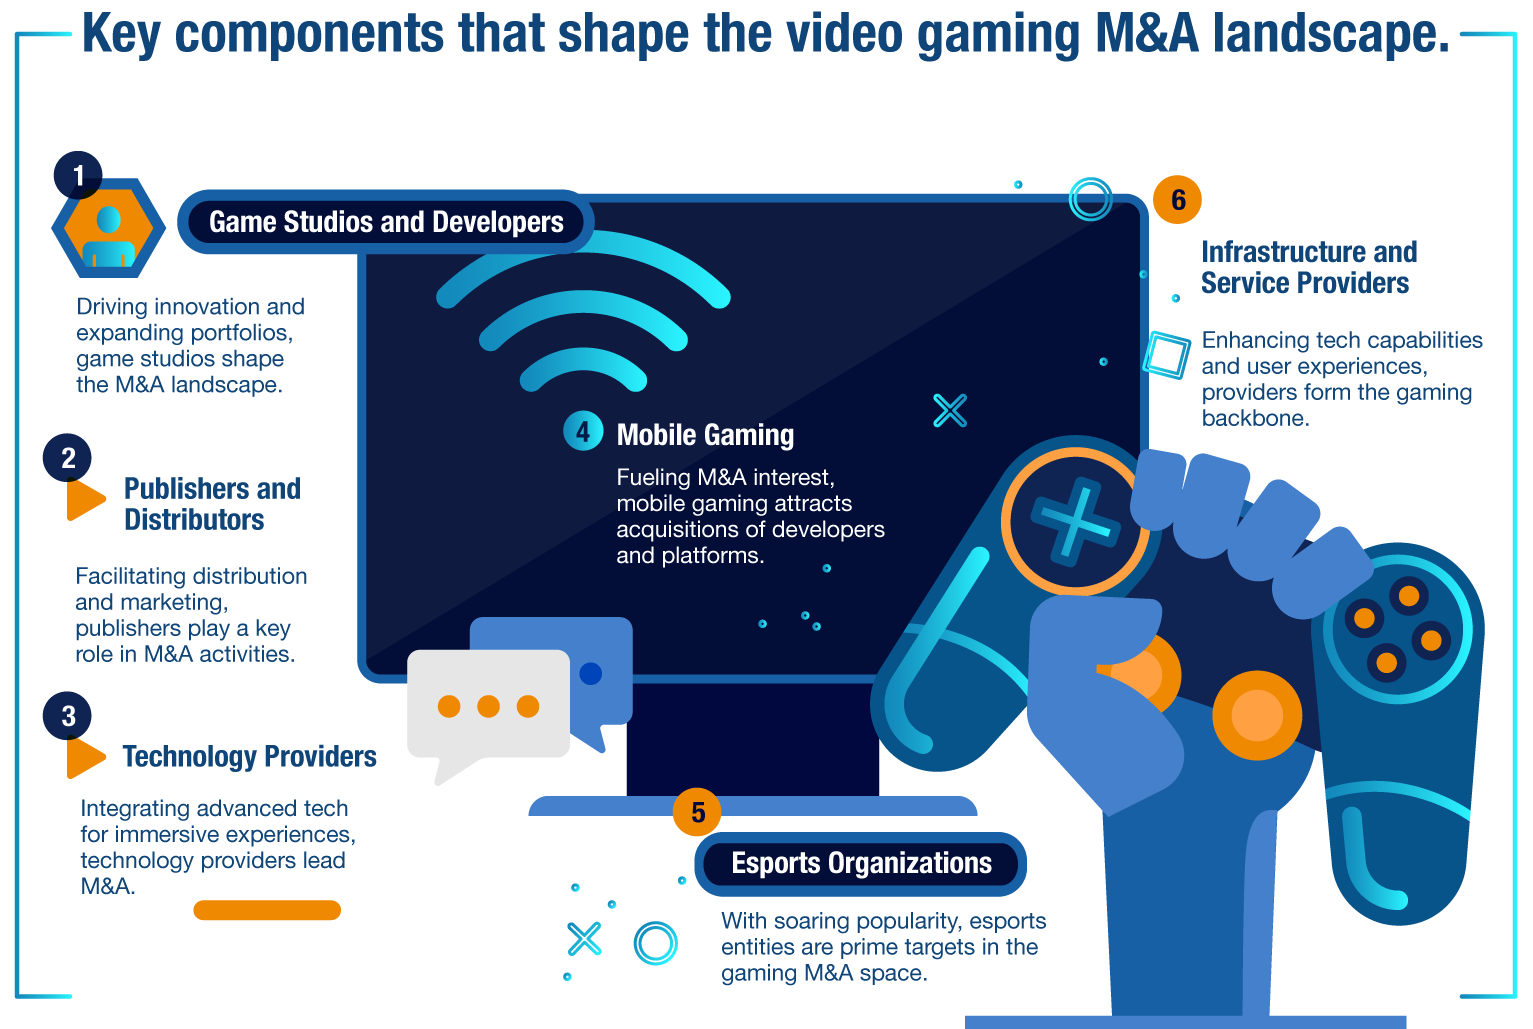 Visualization of the six key components, game studios and developers, publishers and distributors, technology providers, e-sports organizations, and infrastructure and service providers that shaping the video gaming M&A landscape.